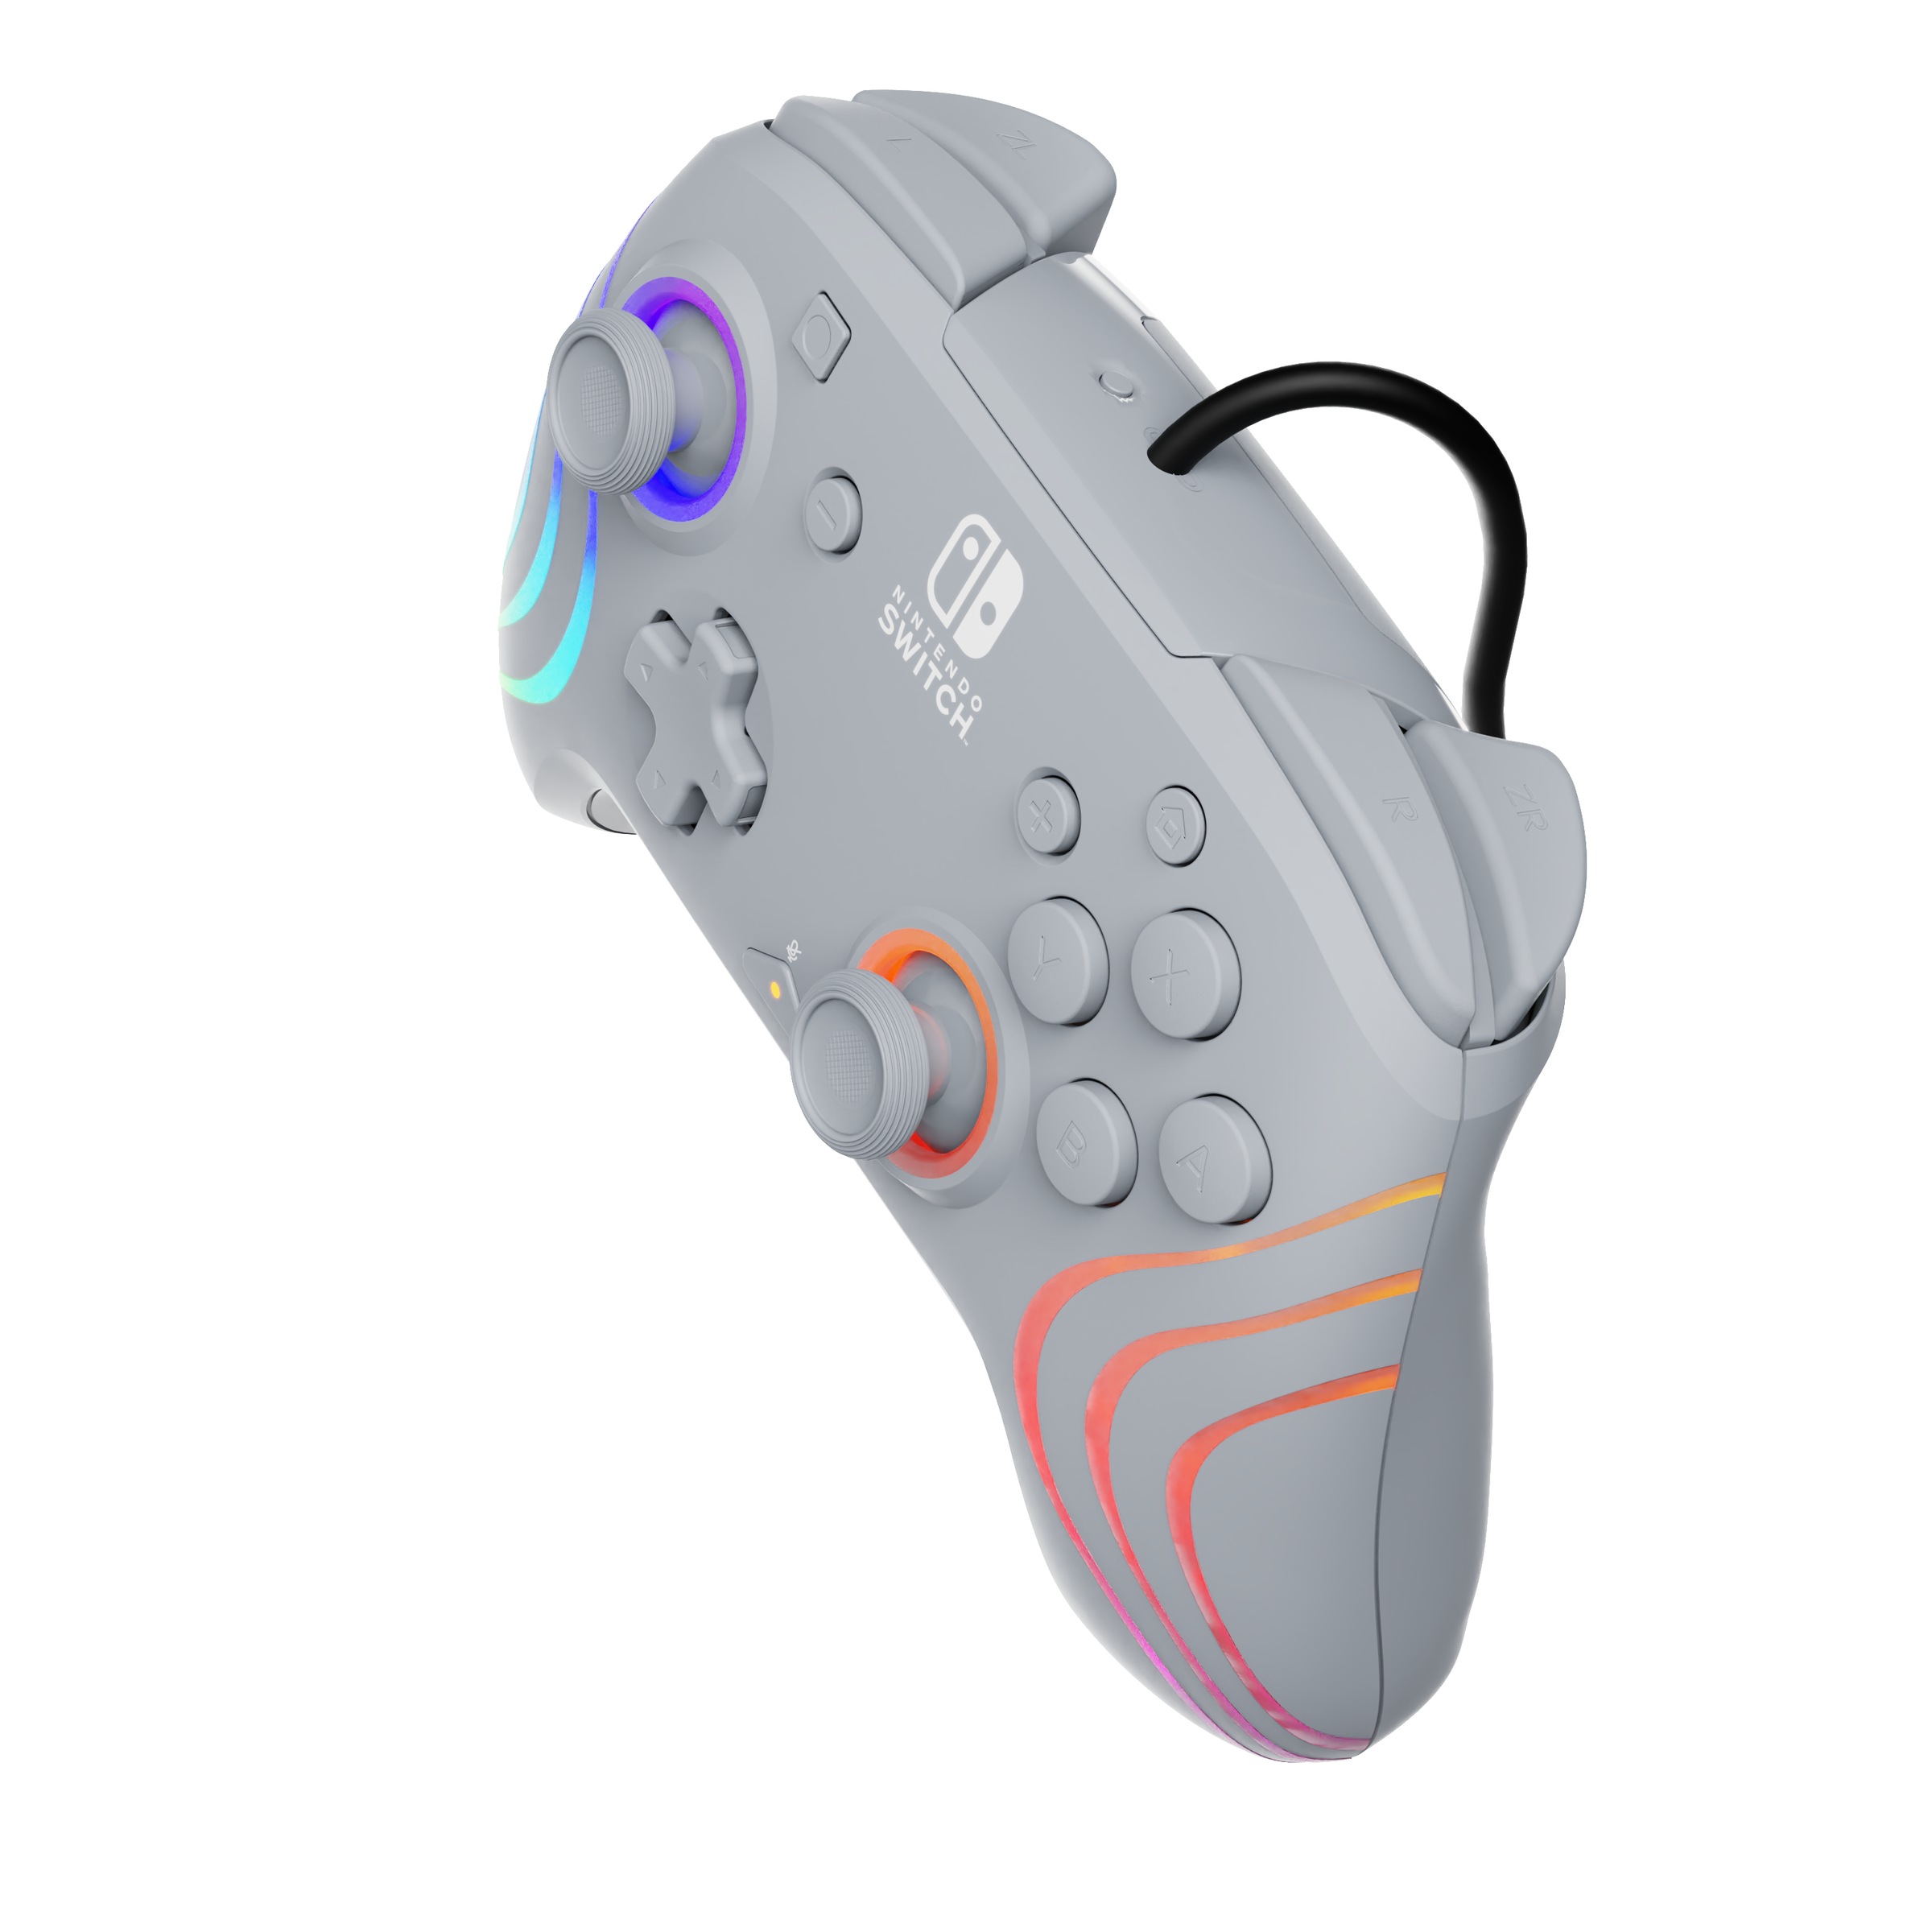 PDP - Performance Designed Products Gamepad »Afterglow Wave«